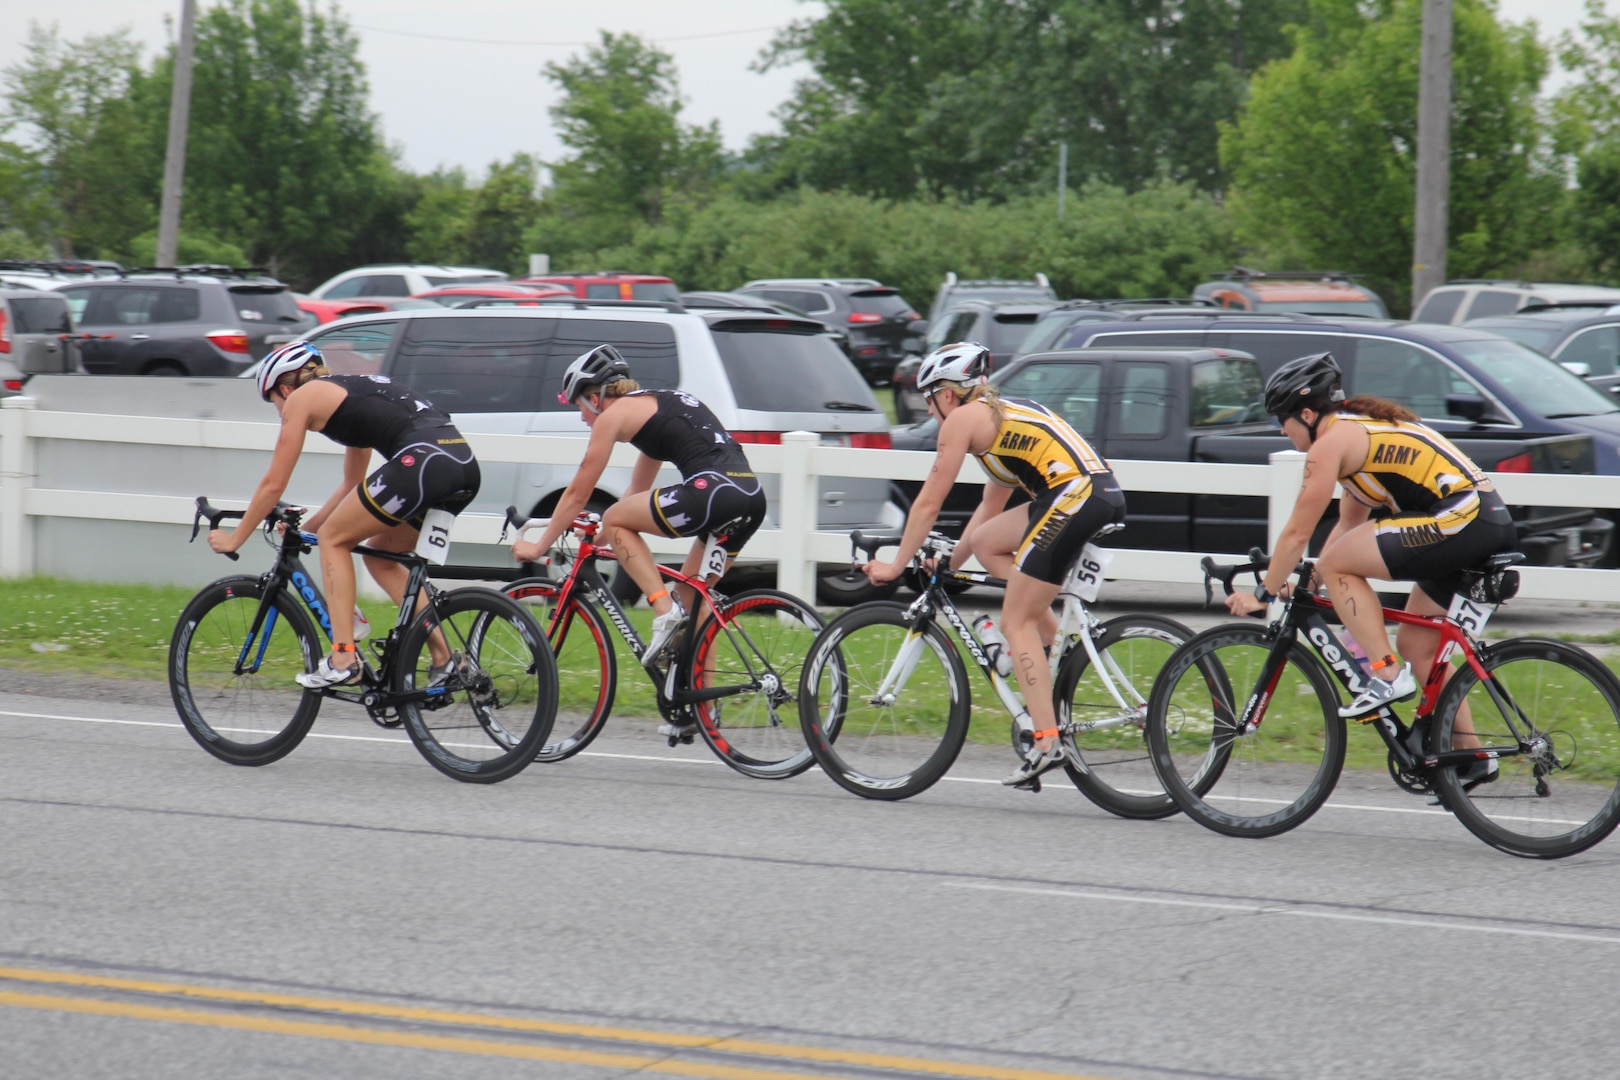 Lead Women’s pack of the 2015 Armed Forces Triathlon Championship at Wolf Lake in Hammond, Ind. held in conjunction with Leon's Triathlon on June 7, 2015. From left to right: Marine Corps’ 2nd lt. Kellie Darmody and Colleen Randolph followed by Army’s  2nd lt. Jessica Clay and 2nd lt. Justine Emge.  Clay and Emge would place 3rd and 4th overall.